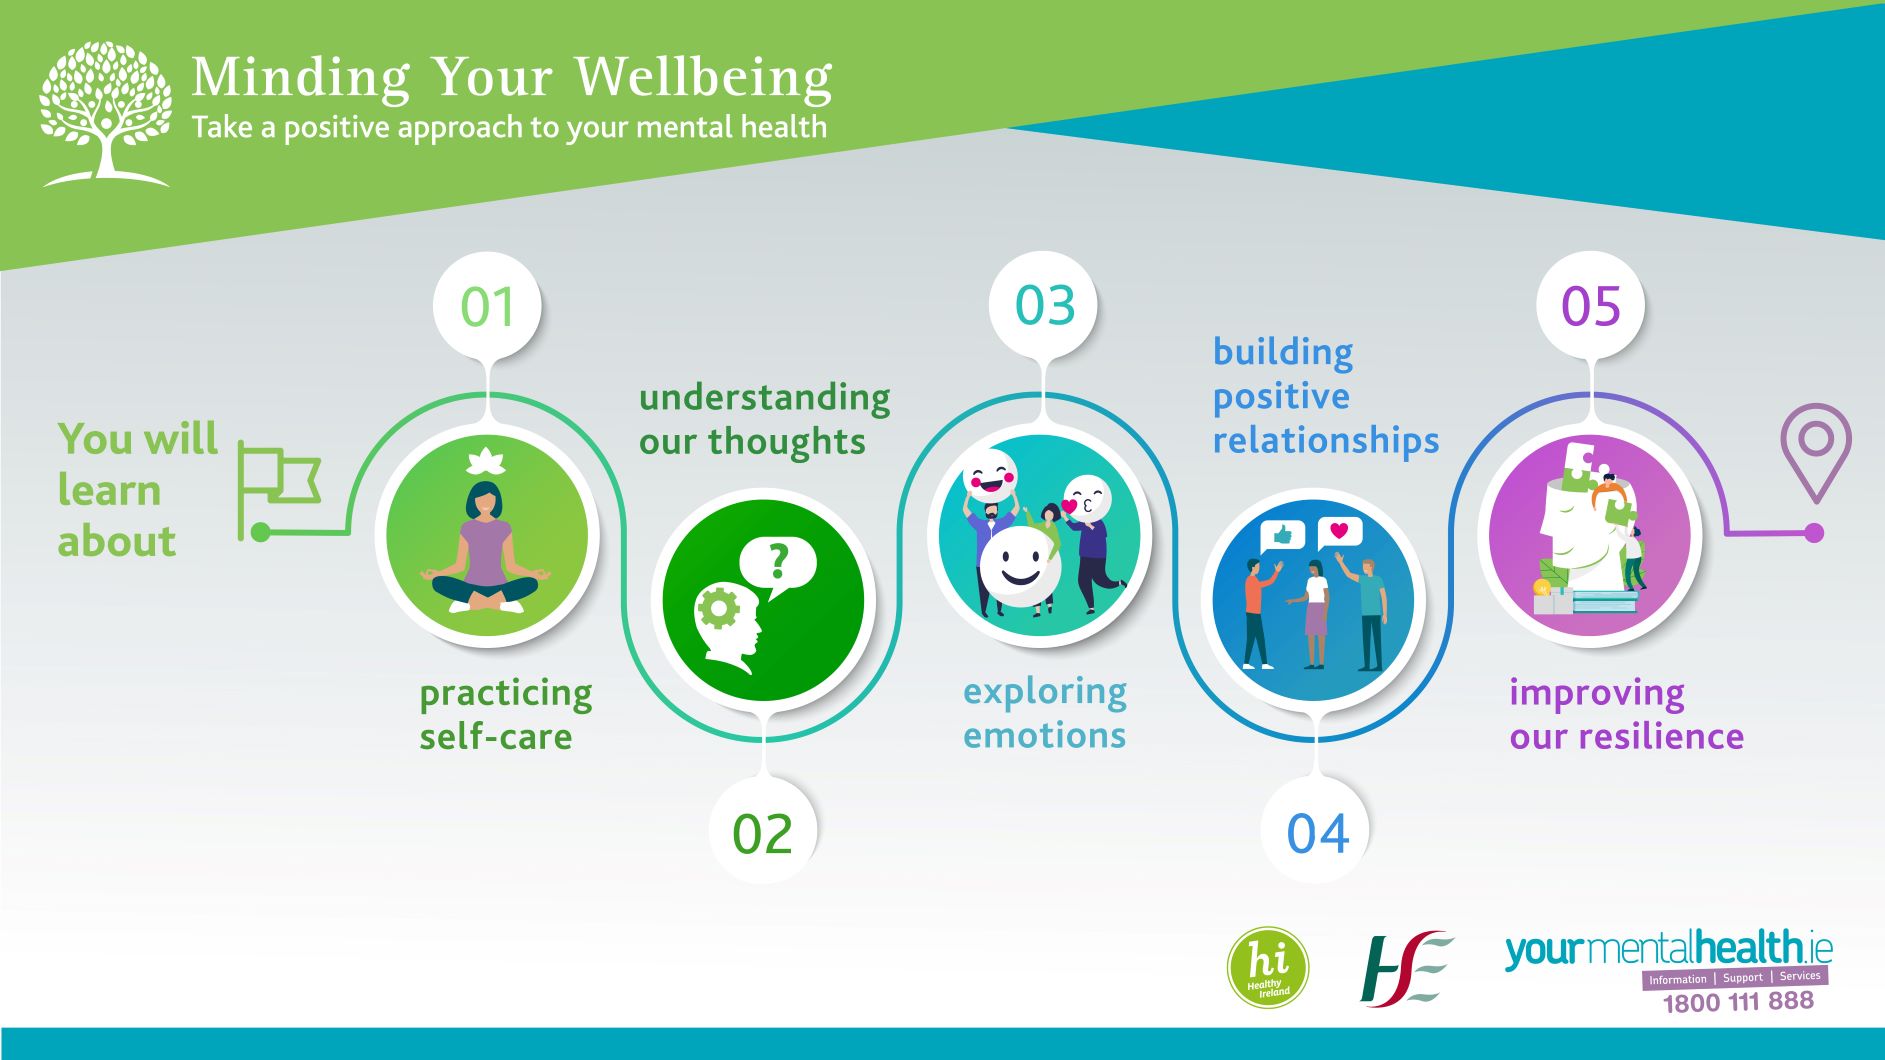 HSE Minding Your Wellbeing | healthykerry.ie